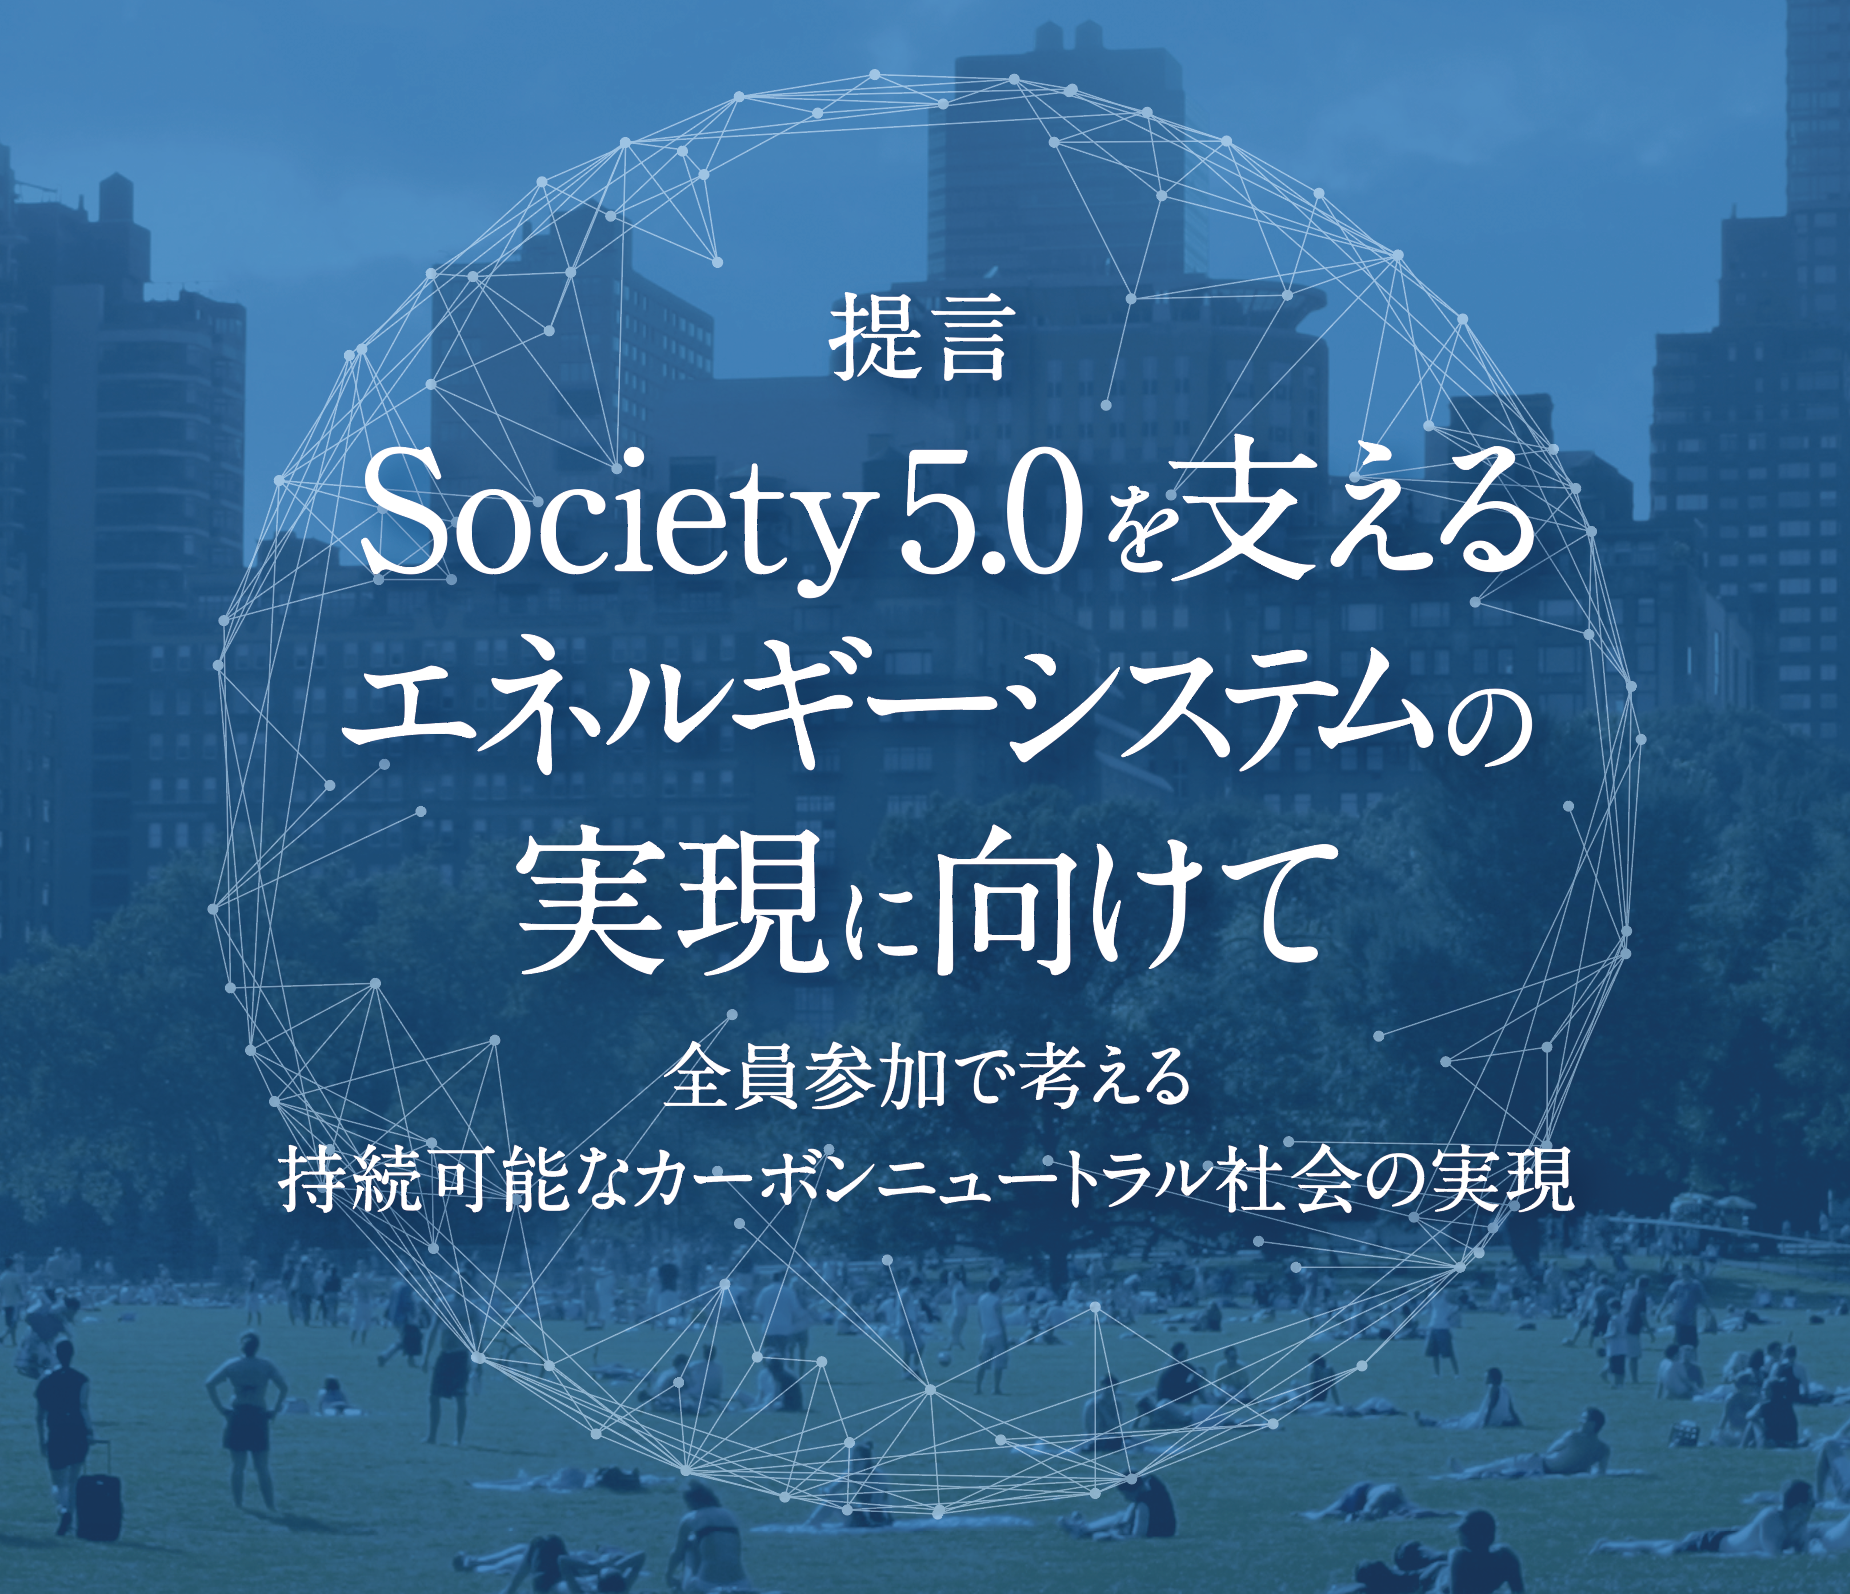 Proposal “Toward Realizing Energy Systems to Support Society 5.0″ Ver.4 (English Version) was released.